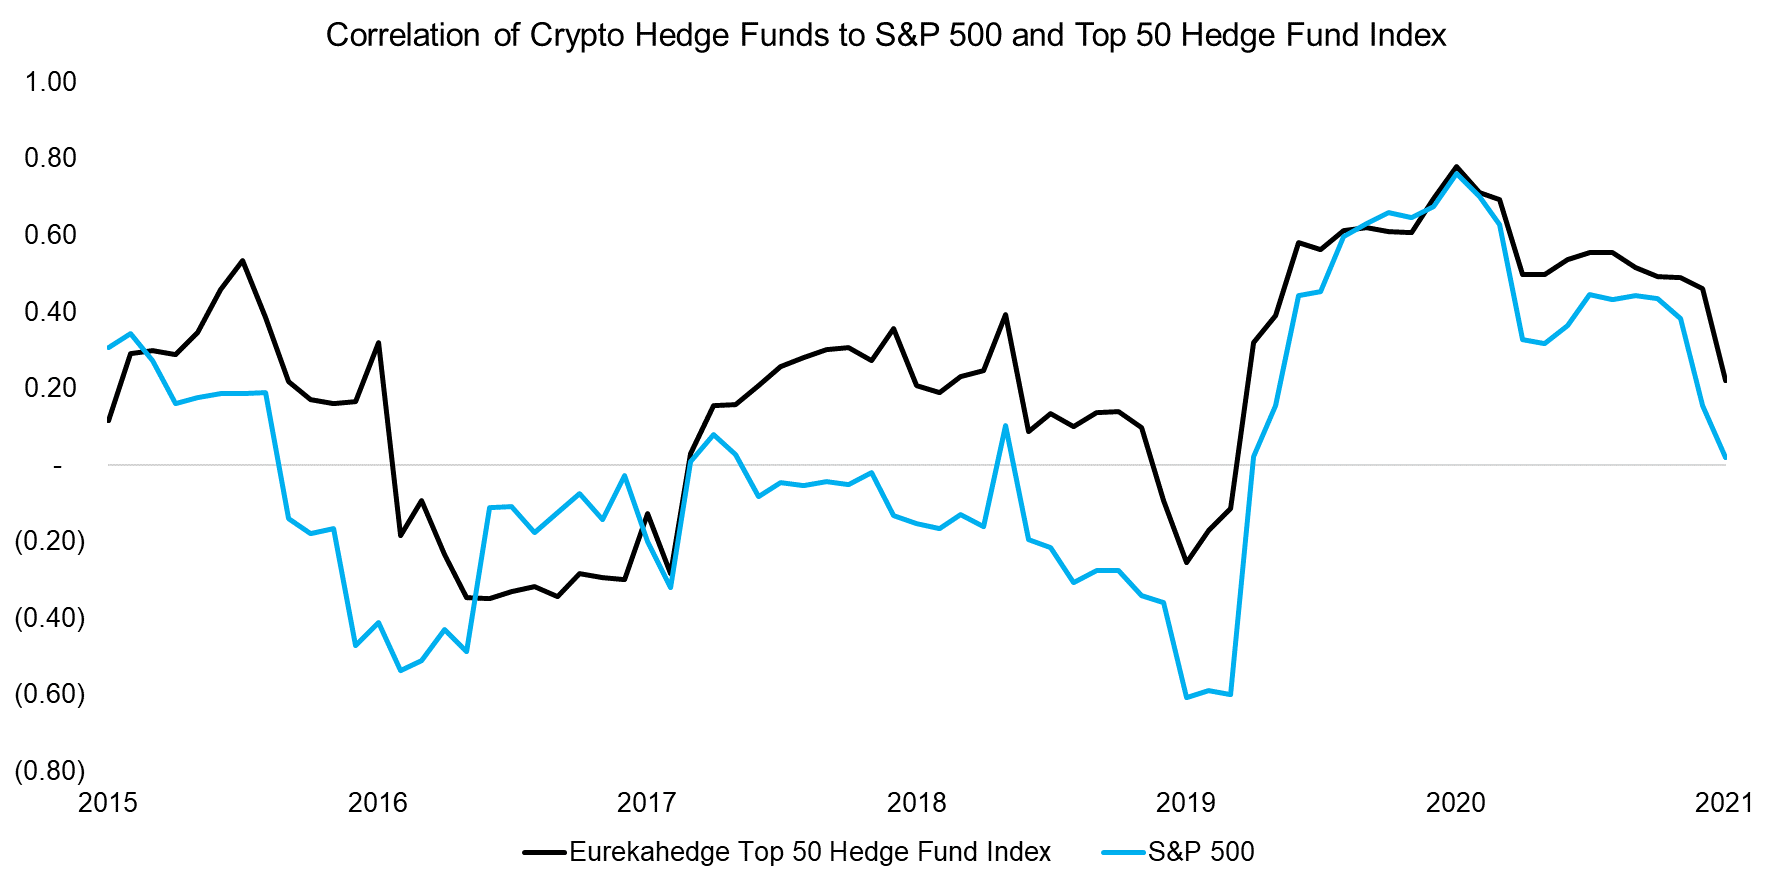 Correlation of Crypto Hedge Funds to S&P 500 and Top 50 Hedge Fund Index